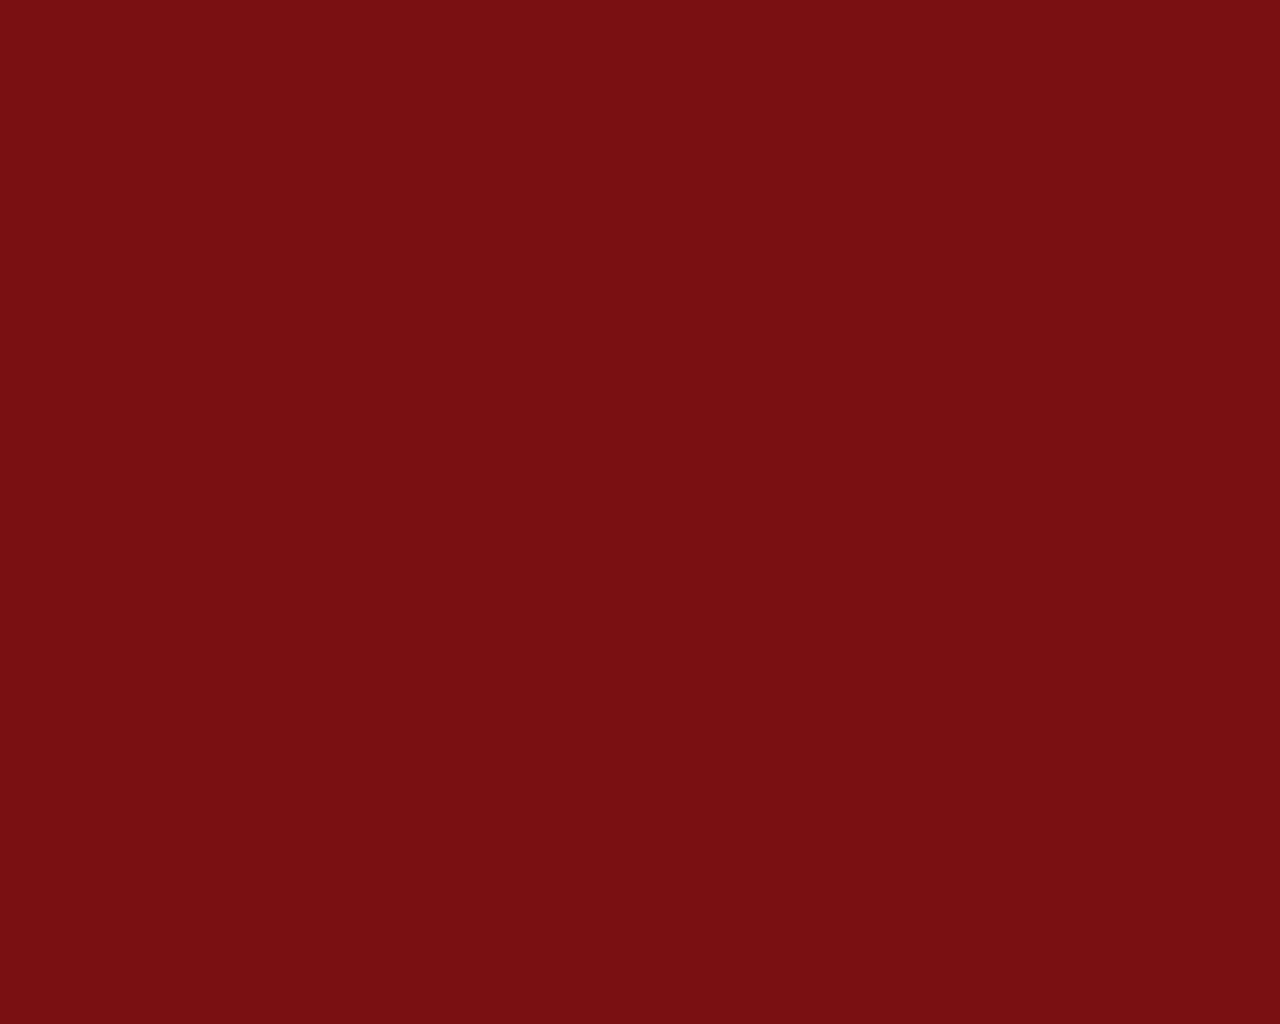 1280x1024-up-maroon-solid-color-background.jpg